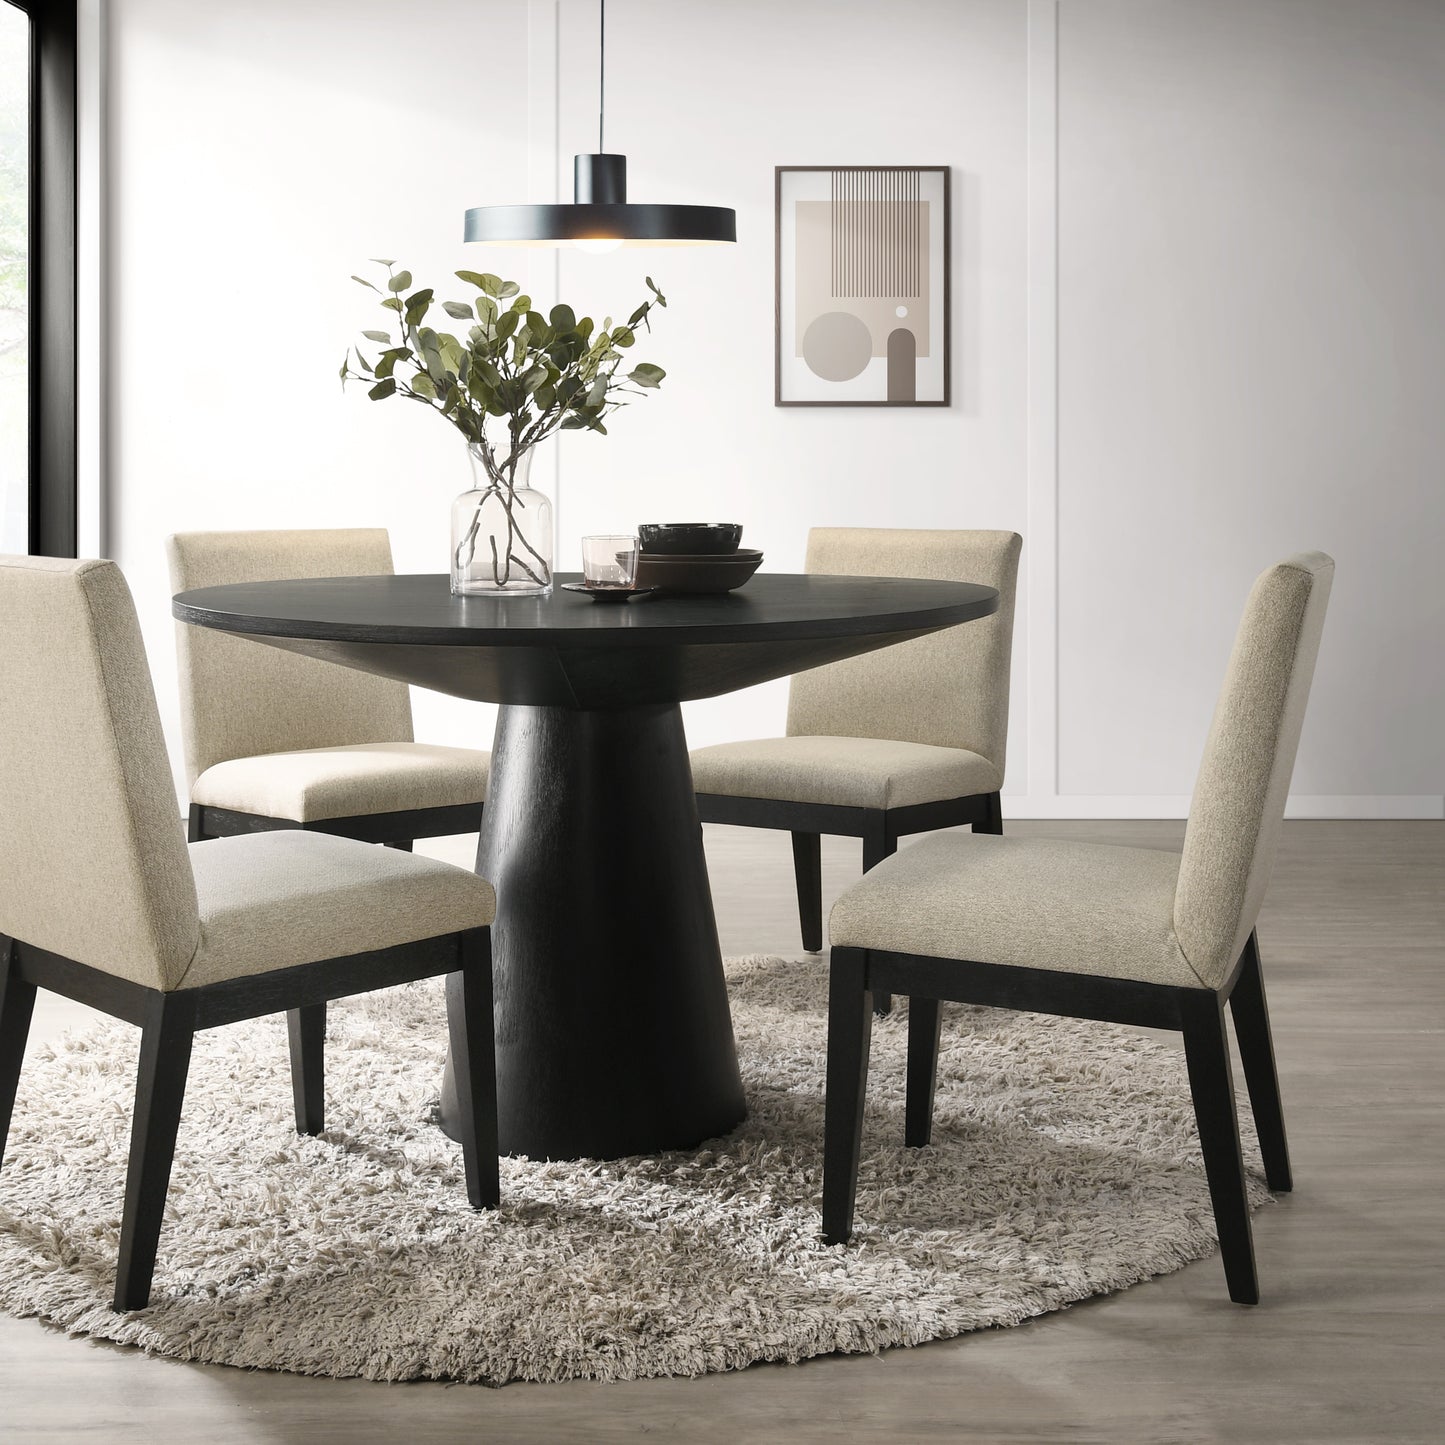 Roundhill Furniture Rocco Contemporary Dining Set, Round Pedestal Table with 4 Chairs, Ebony